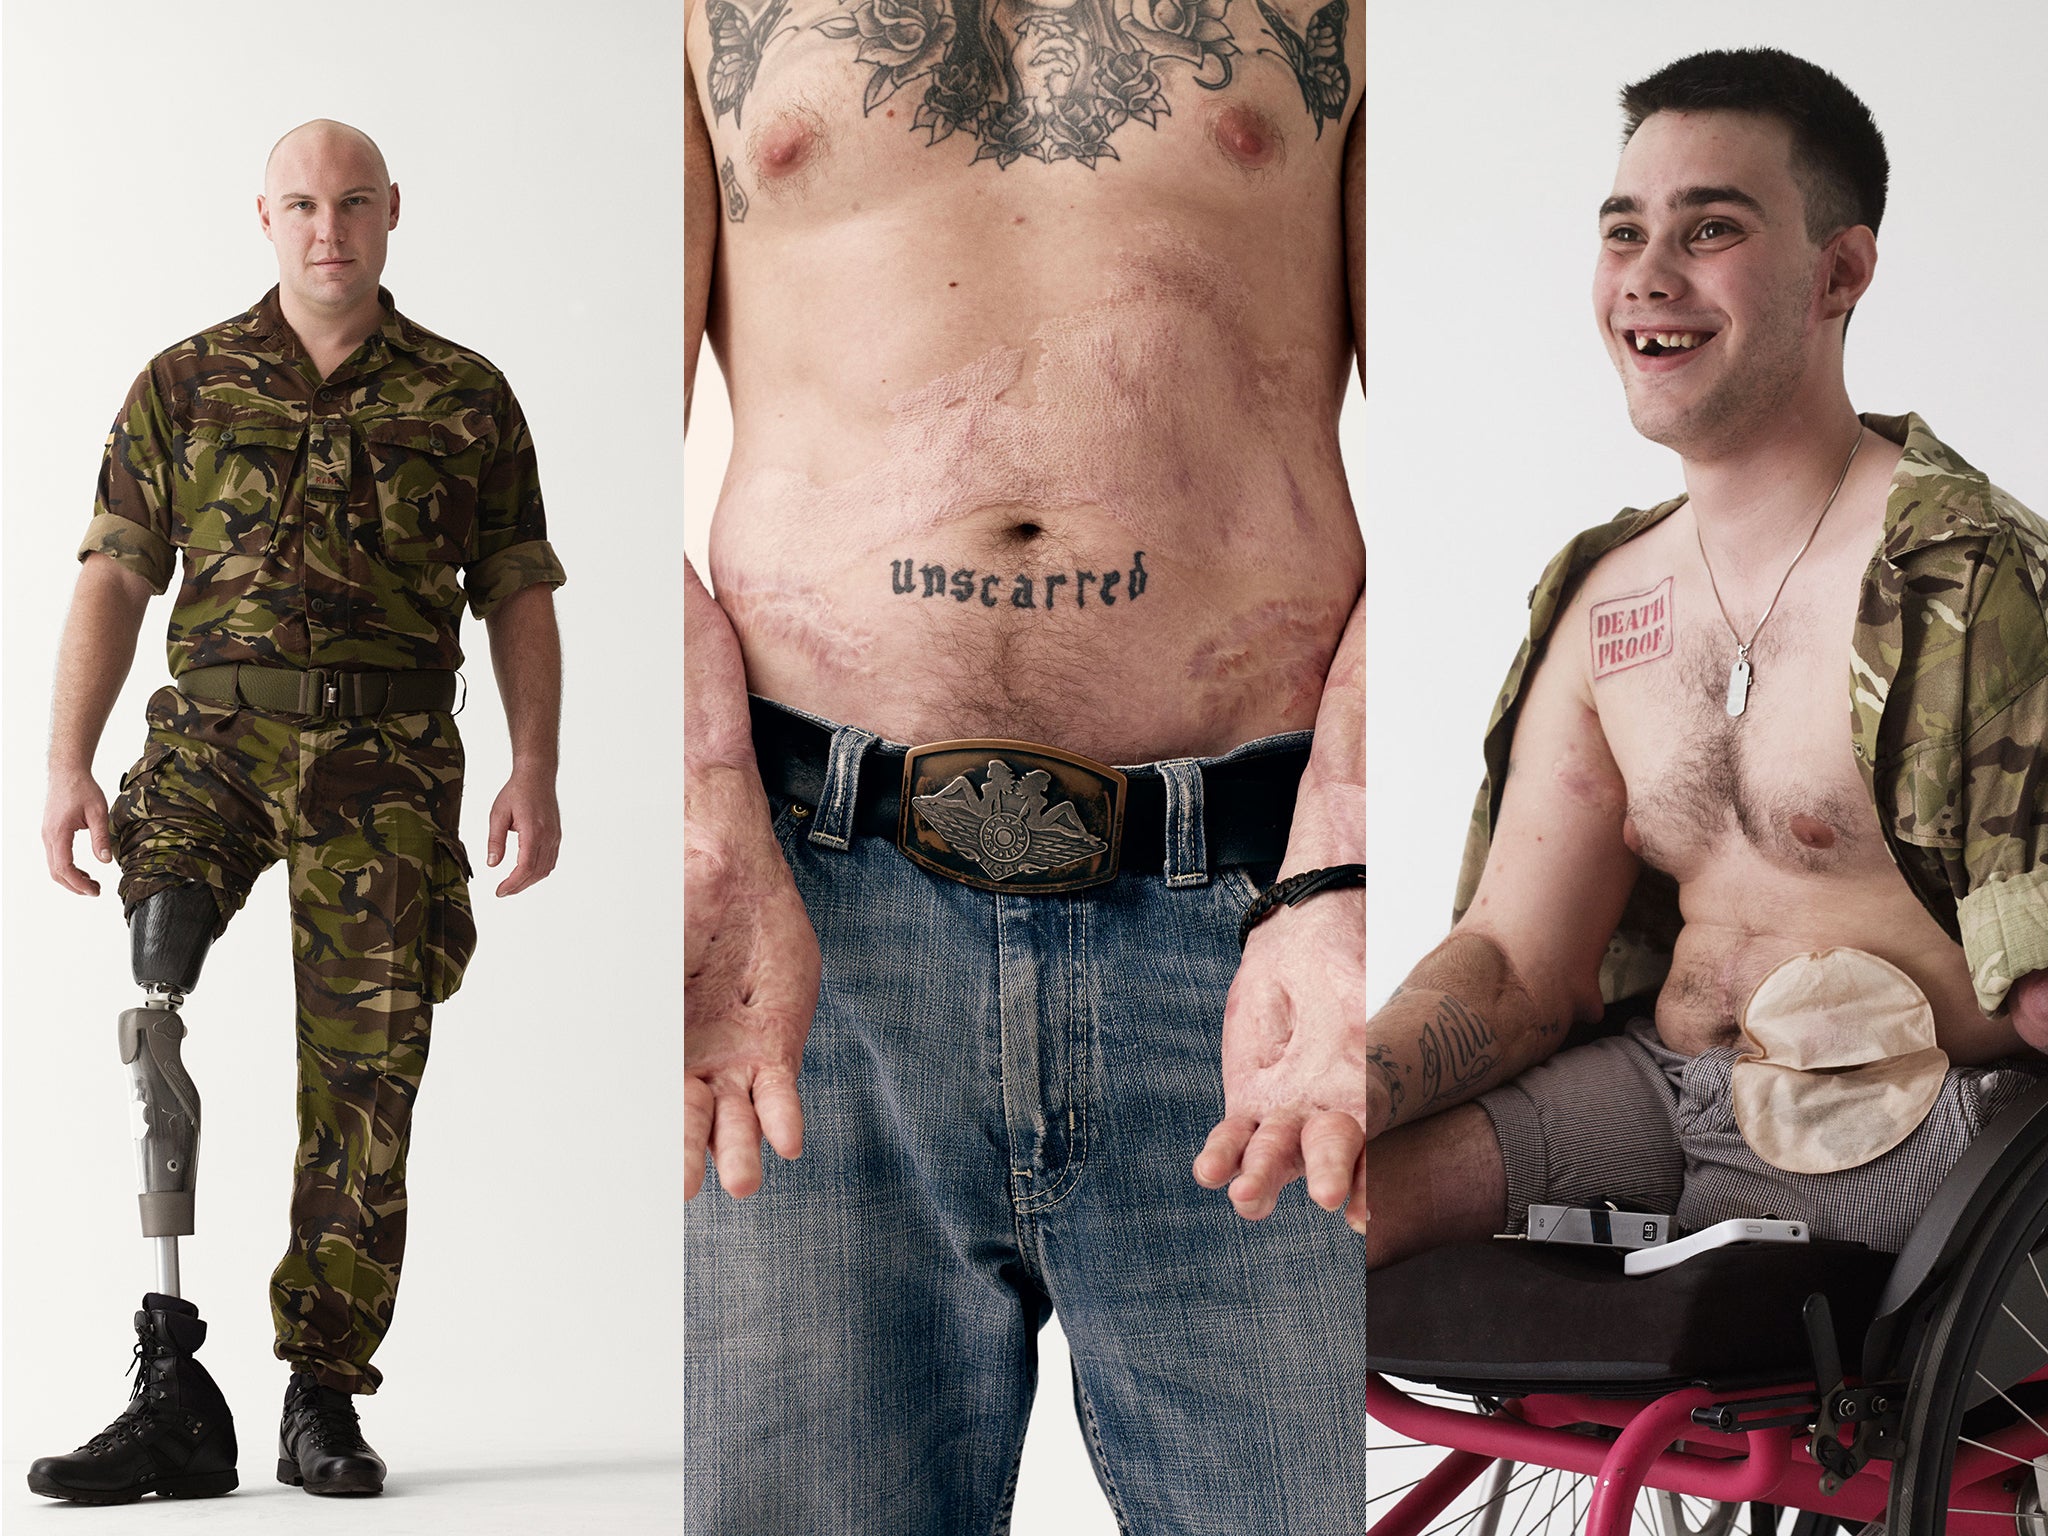 The musician Bryan Adams let us use his photos of wounded veterans as a visual representation of the hardships faced by soldiers both abroad and at home